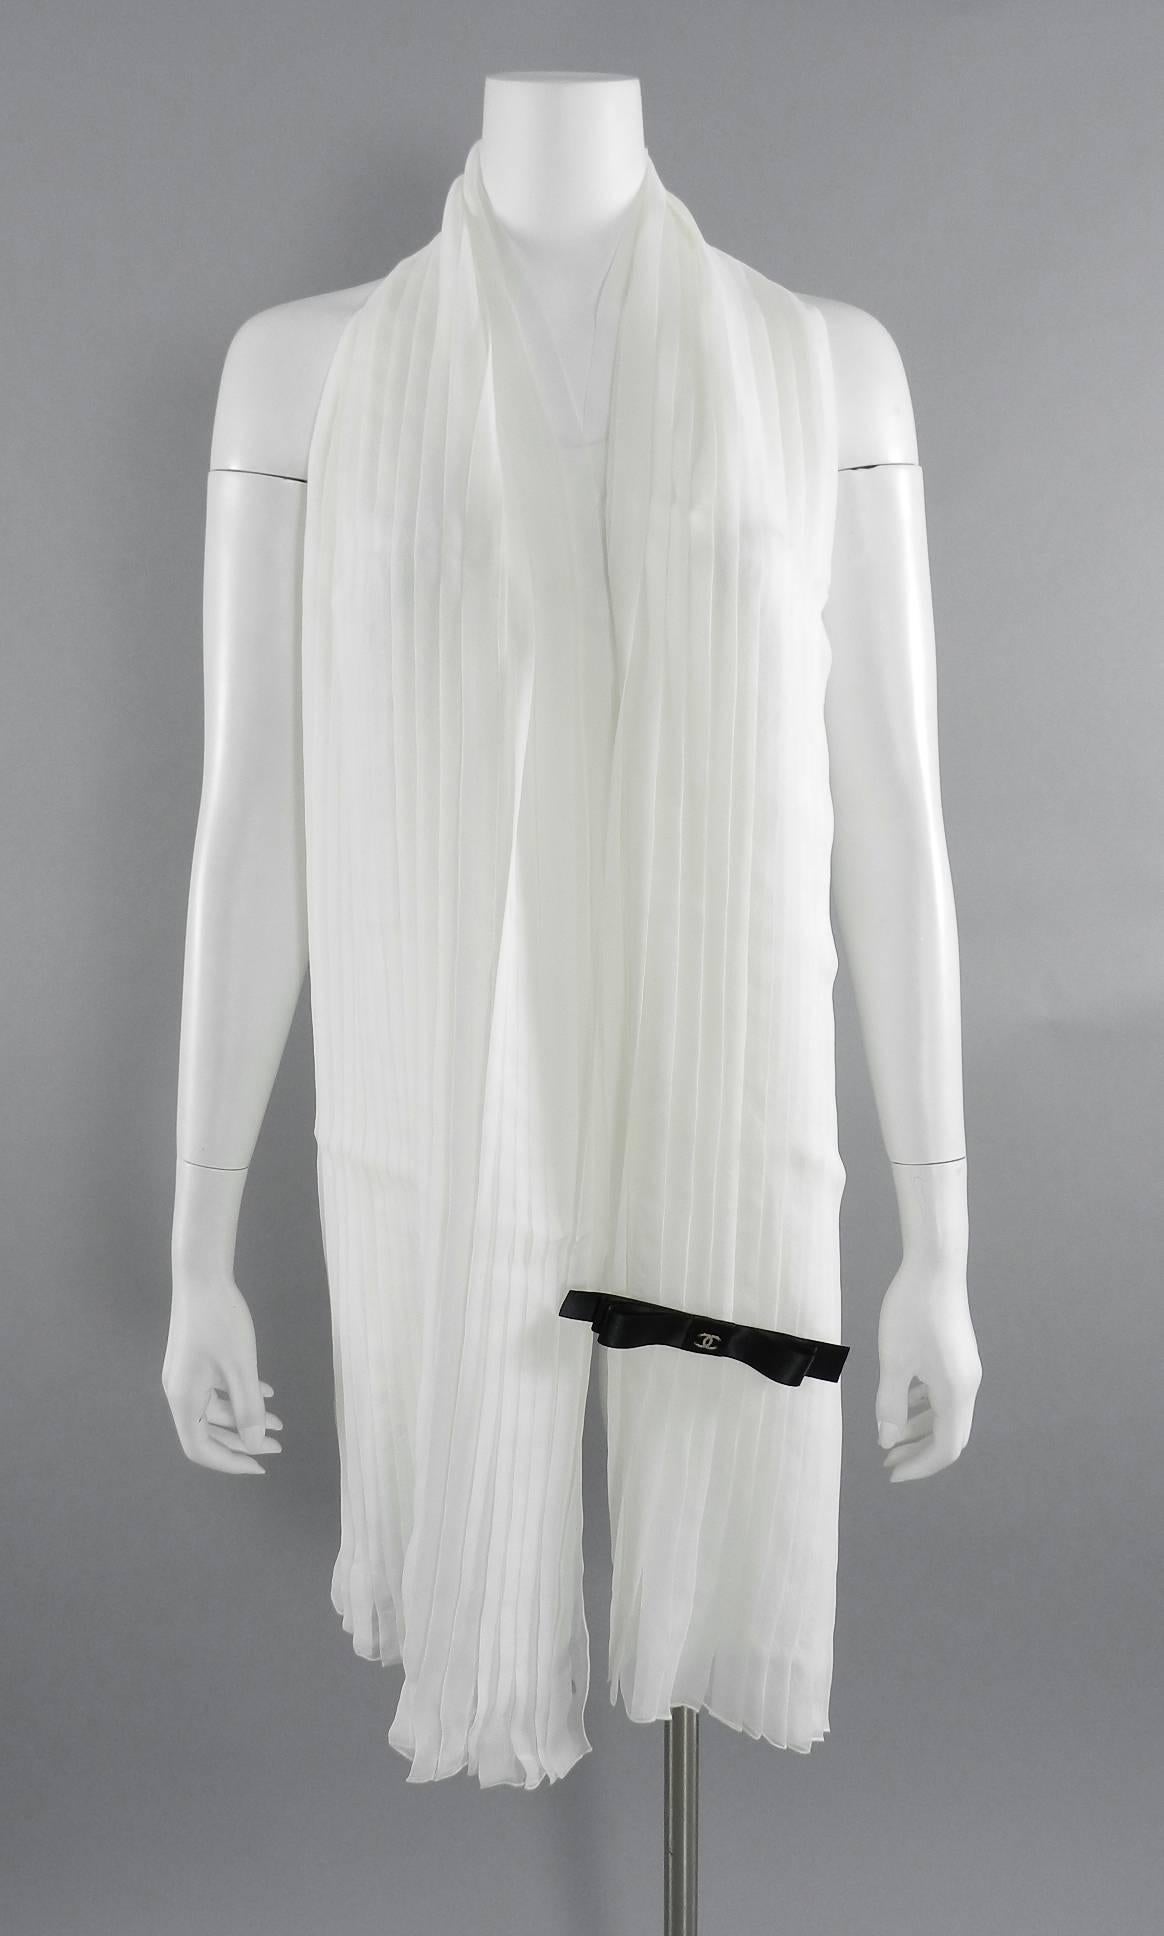 CHANEL sheer white silk pleated long scarf with Black satin Bow.  100% silk. 80" x 14". Excellent clean pre-owned condiiton - like new.

We ship worldwide.